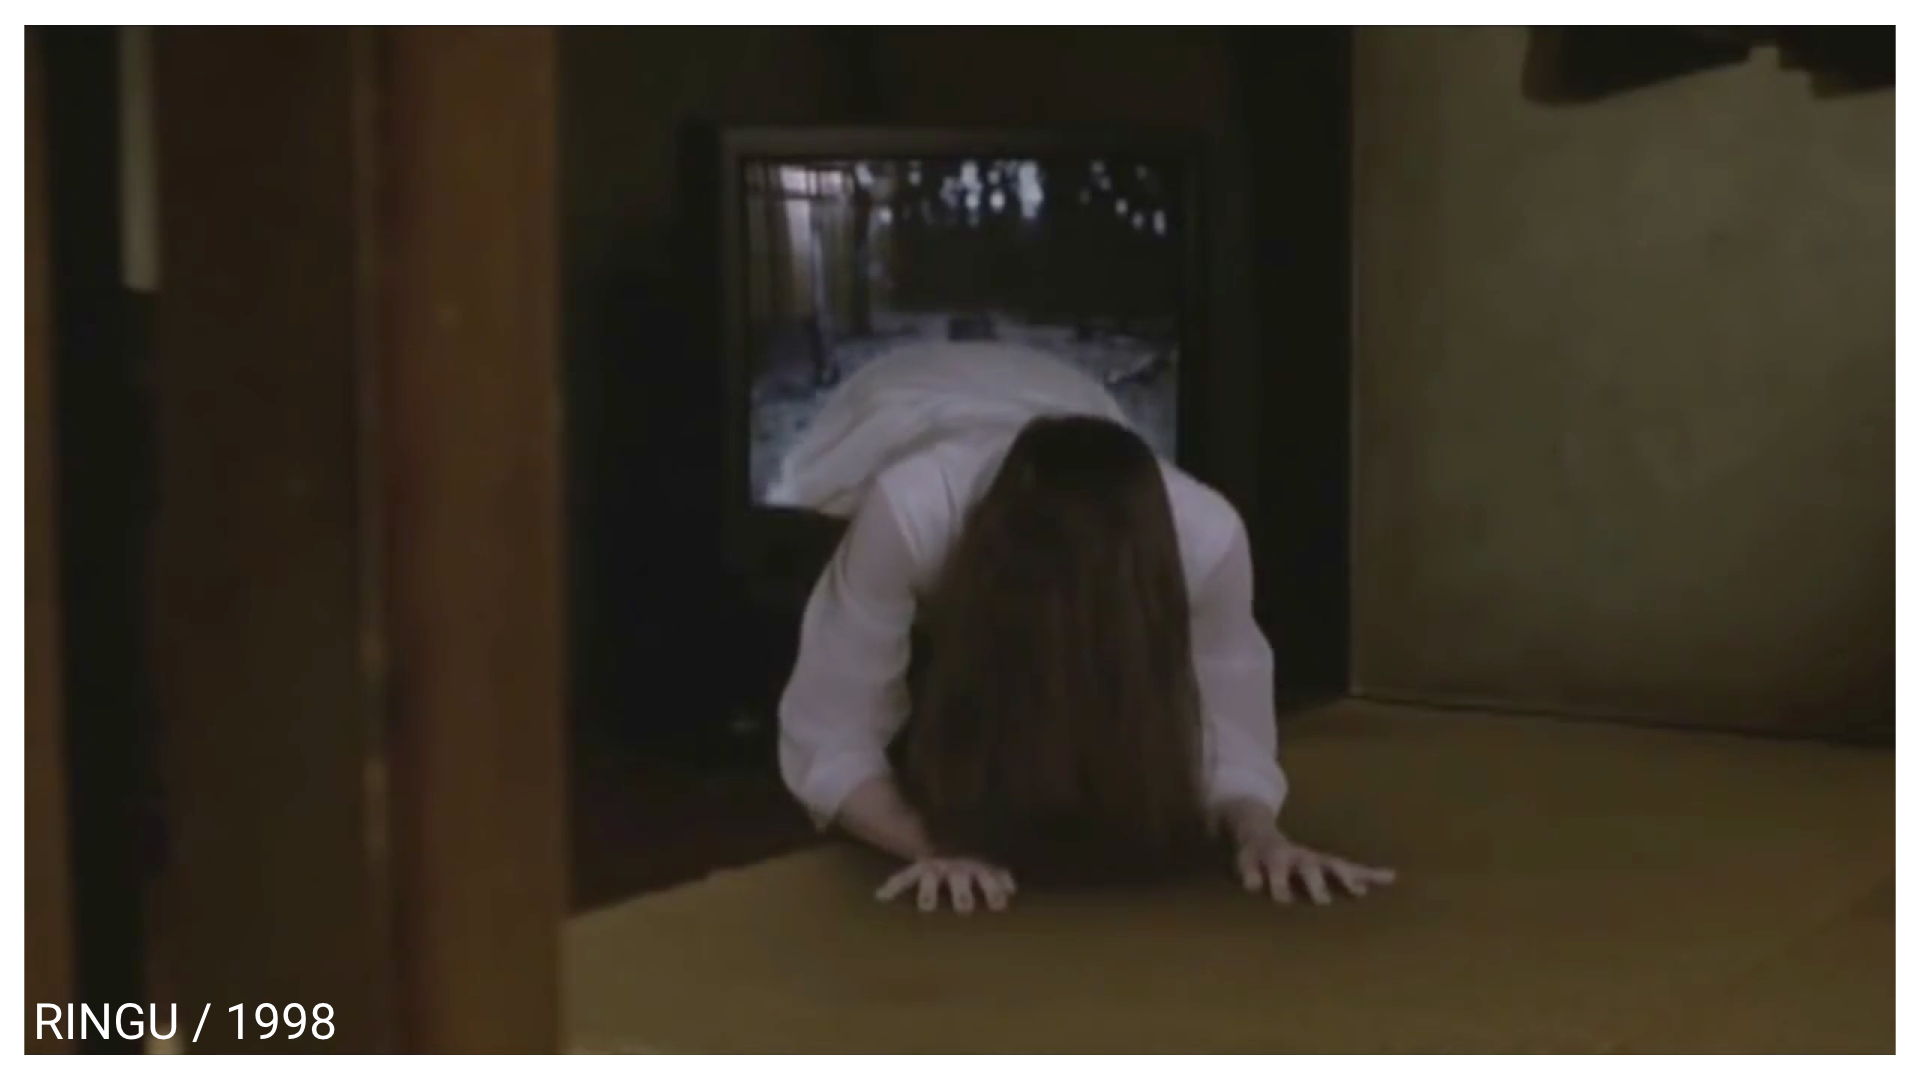 Still from the movie "Ringu" showing a girl with her face obscured by hair crawling out of a television set